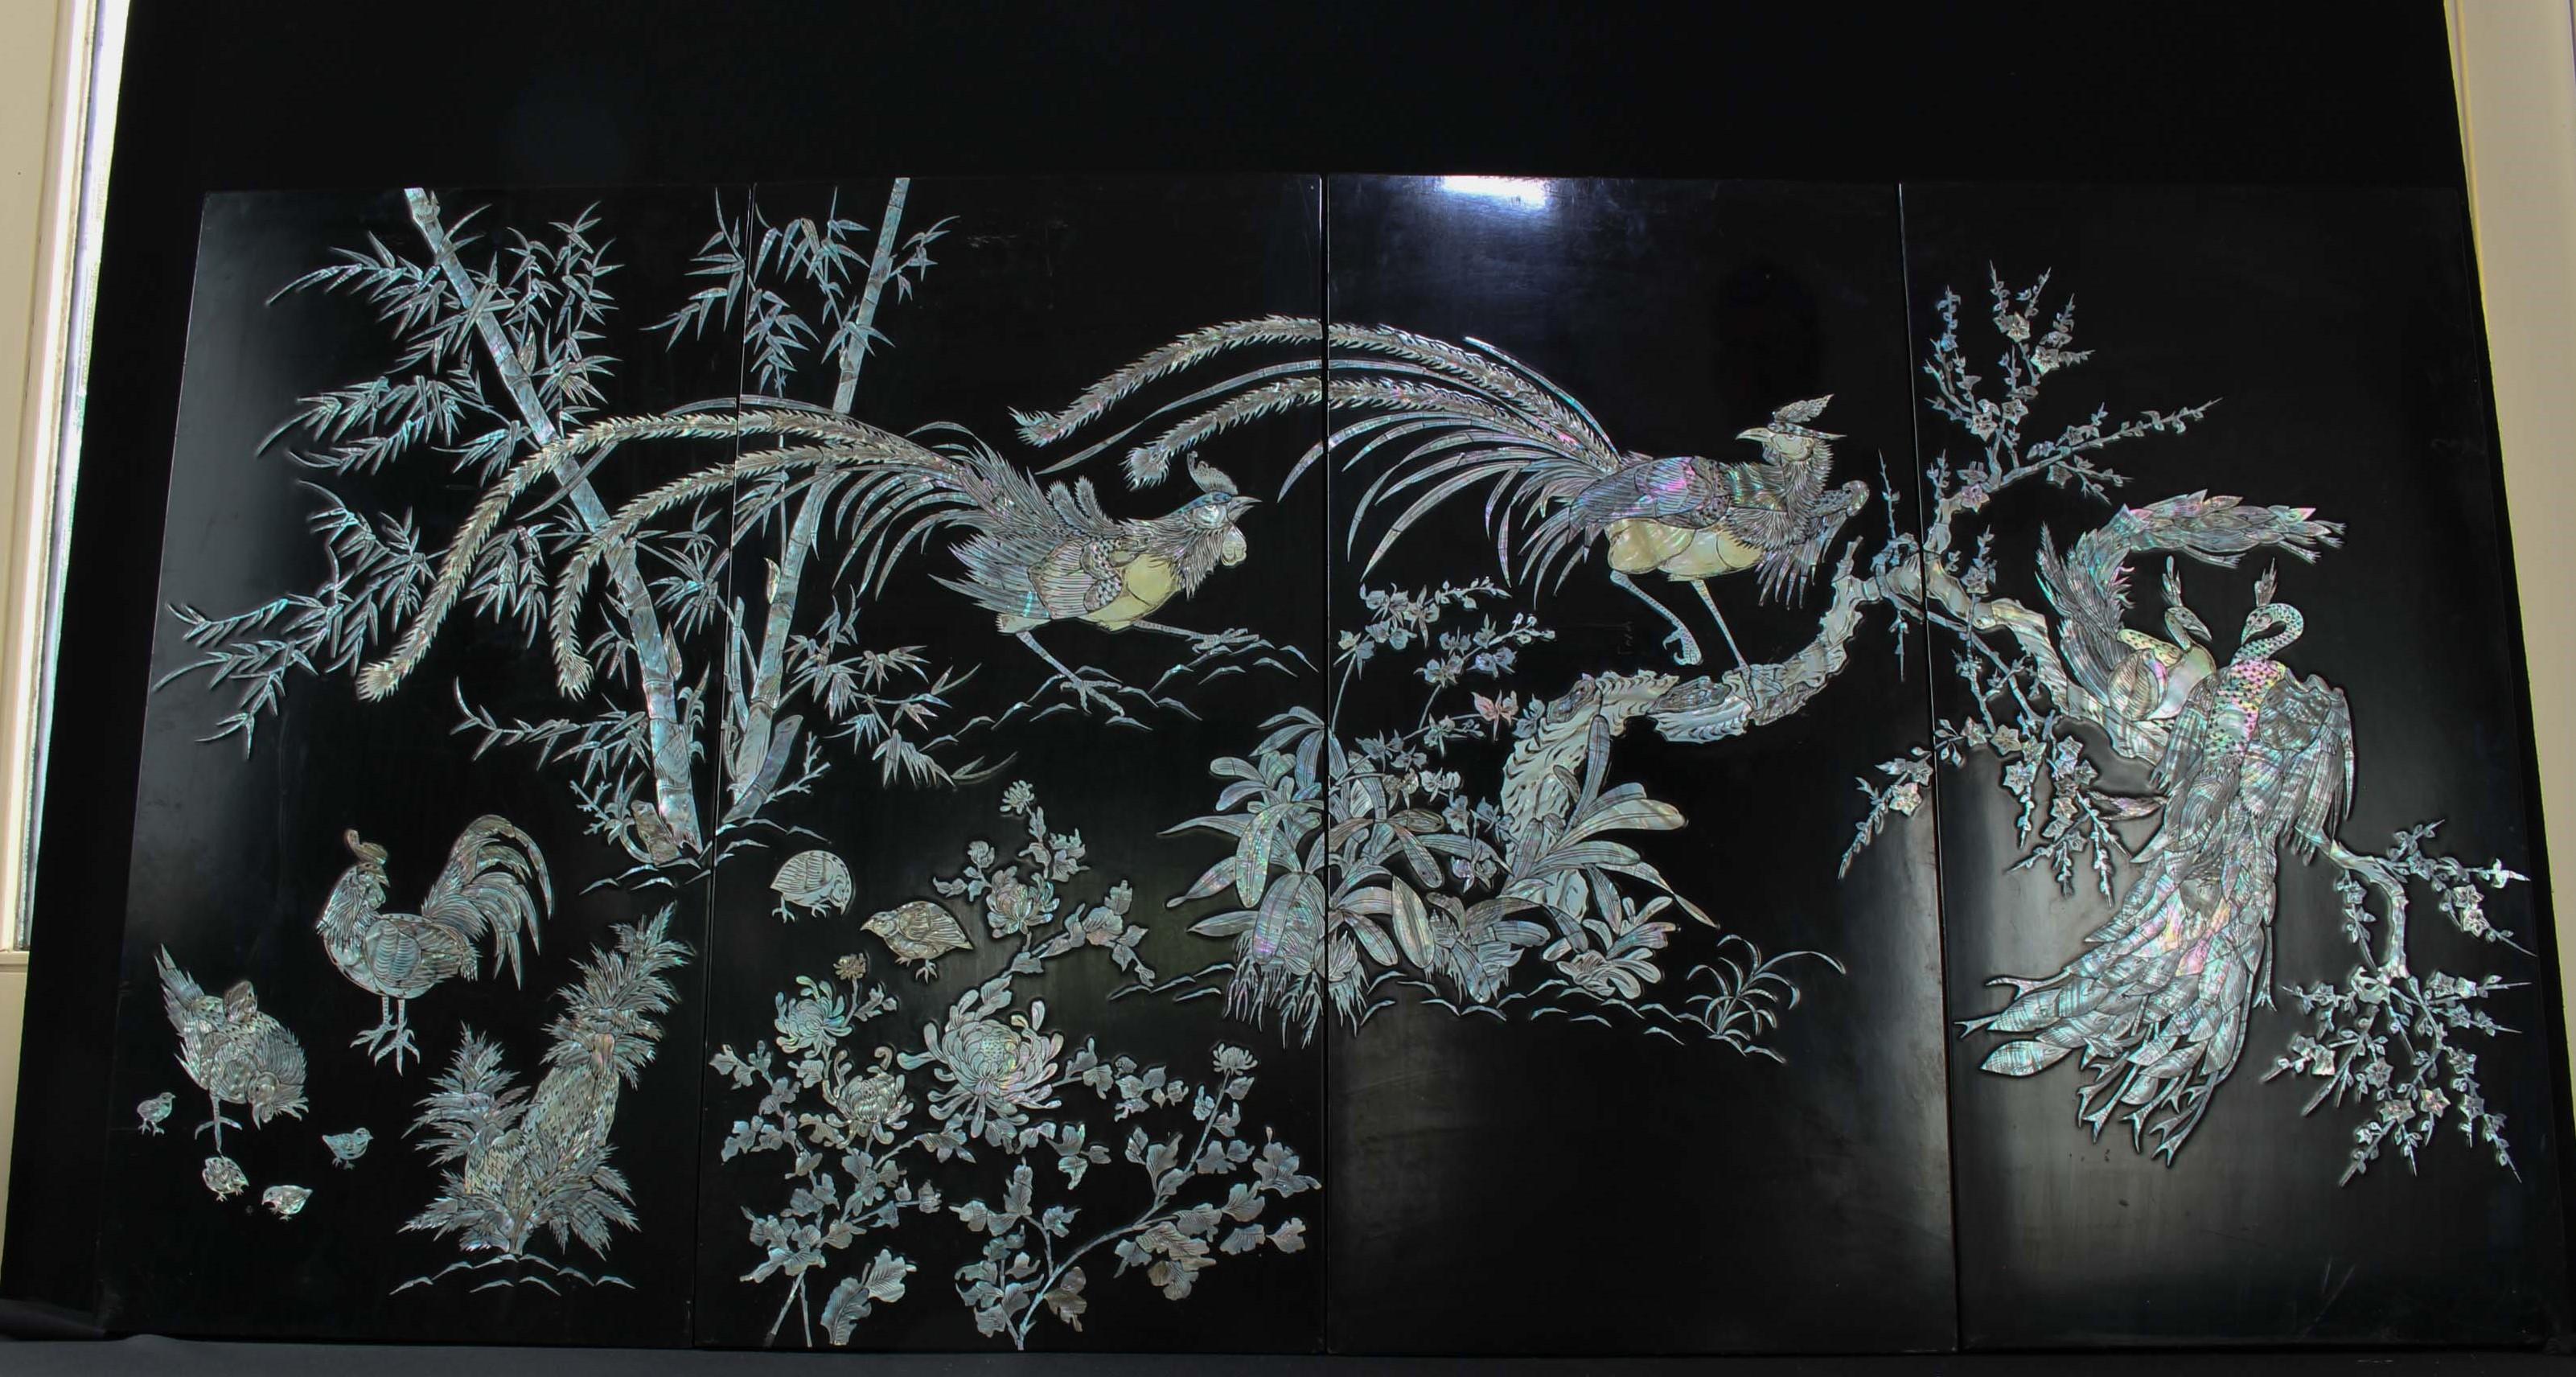 Are you looking for some magnificent, vintage oriental / Japanese wall art to display in your home or business? Look no further than this spectacular, retro set of 4 wall panels of MOP (mother of pearl) shell birds on black lacquered wood wall